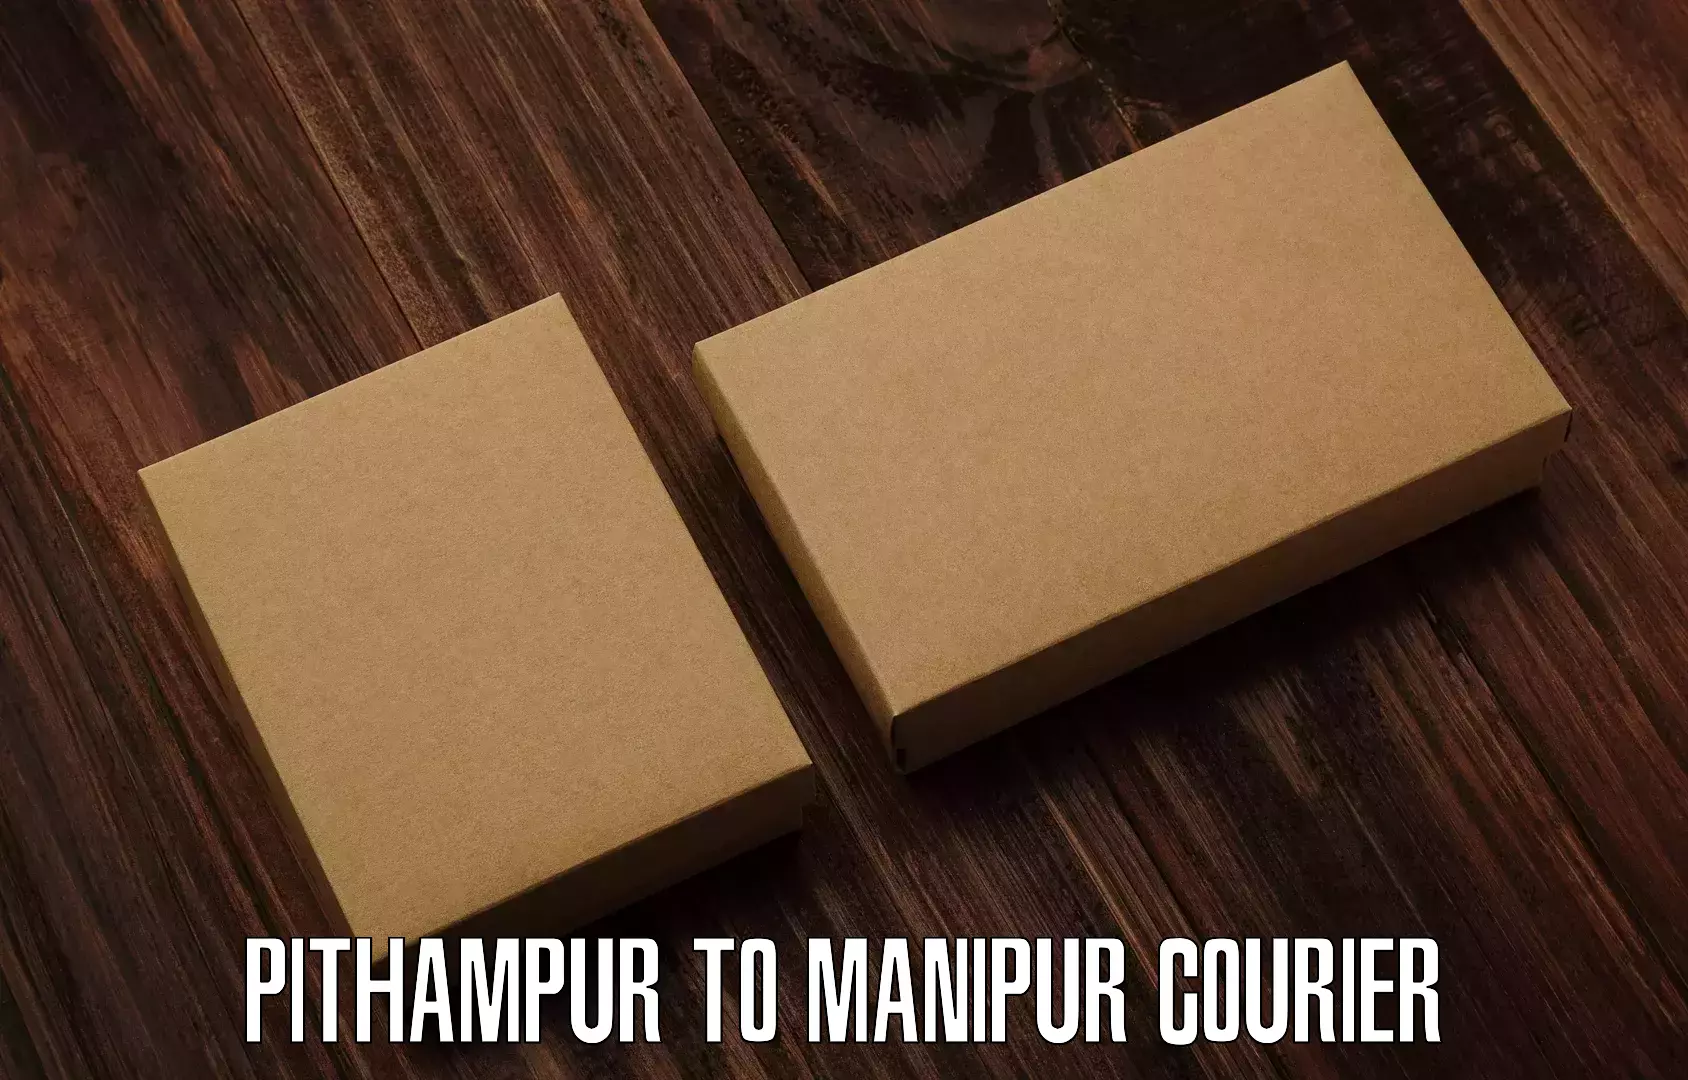 Fast shipping solutions Pithampur to Chandel